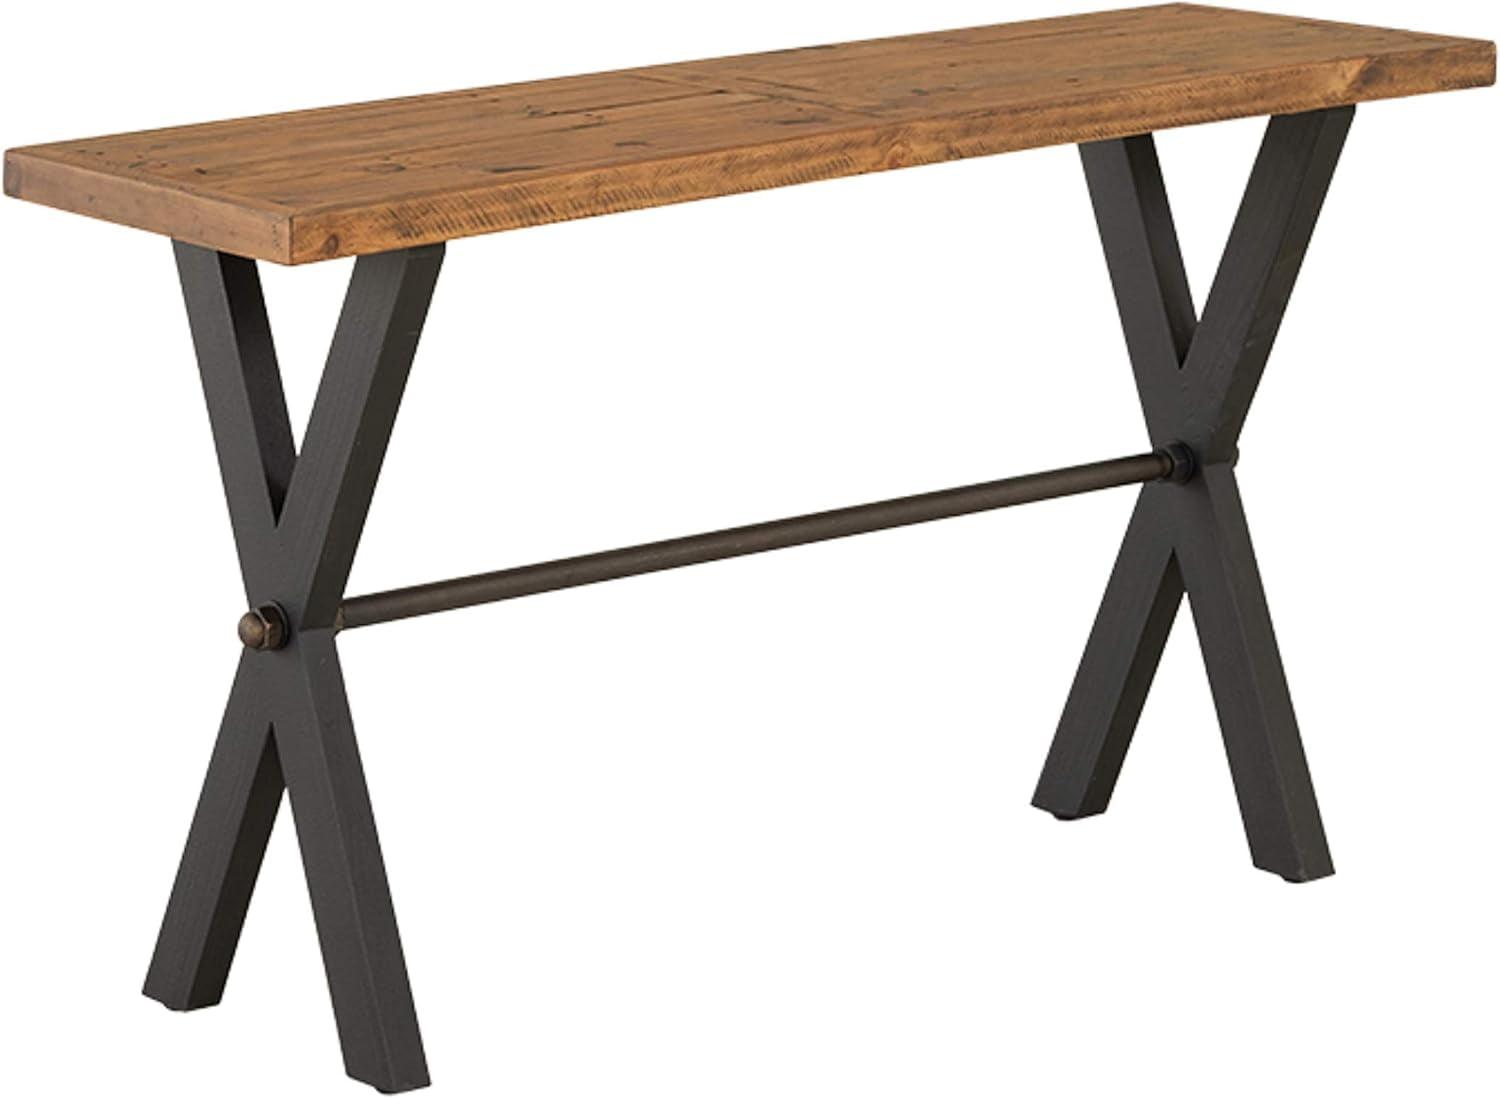 Austin Industrial Rustic 55" Reclaimed Wood Console Table